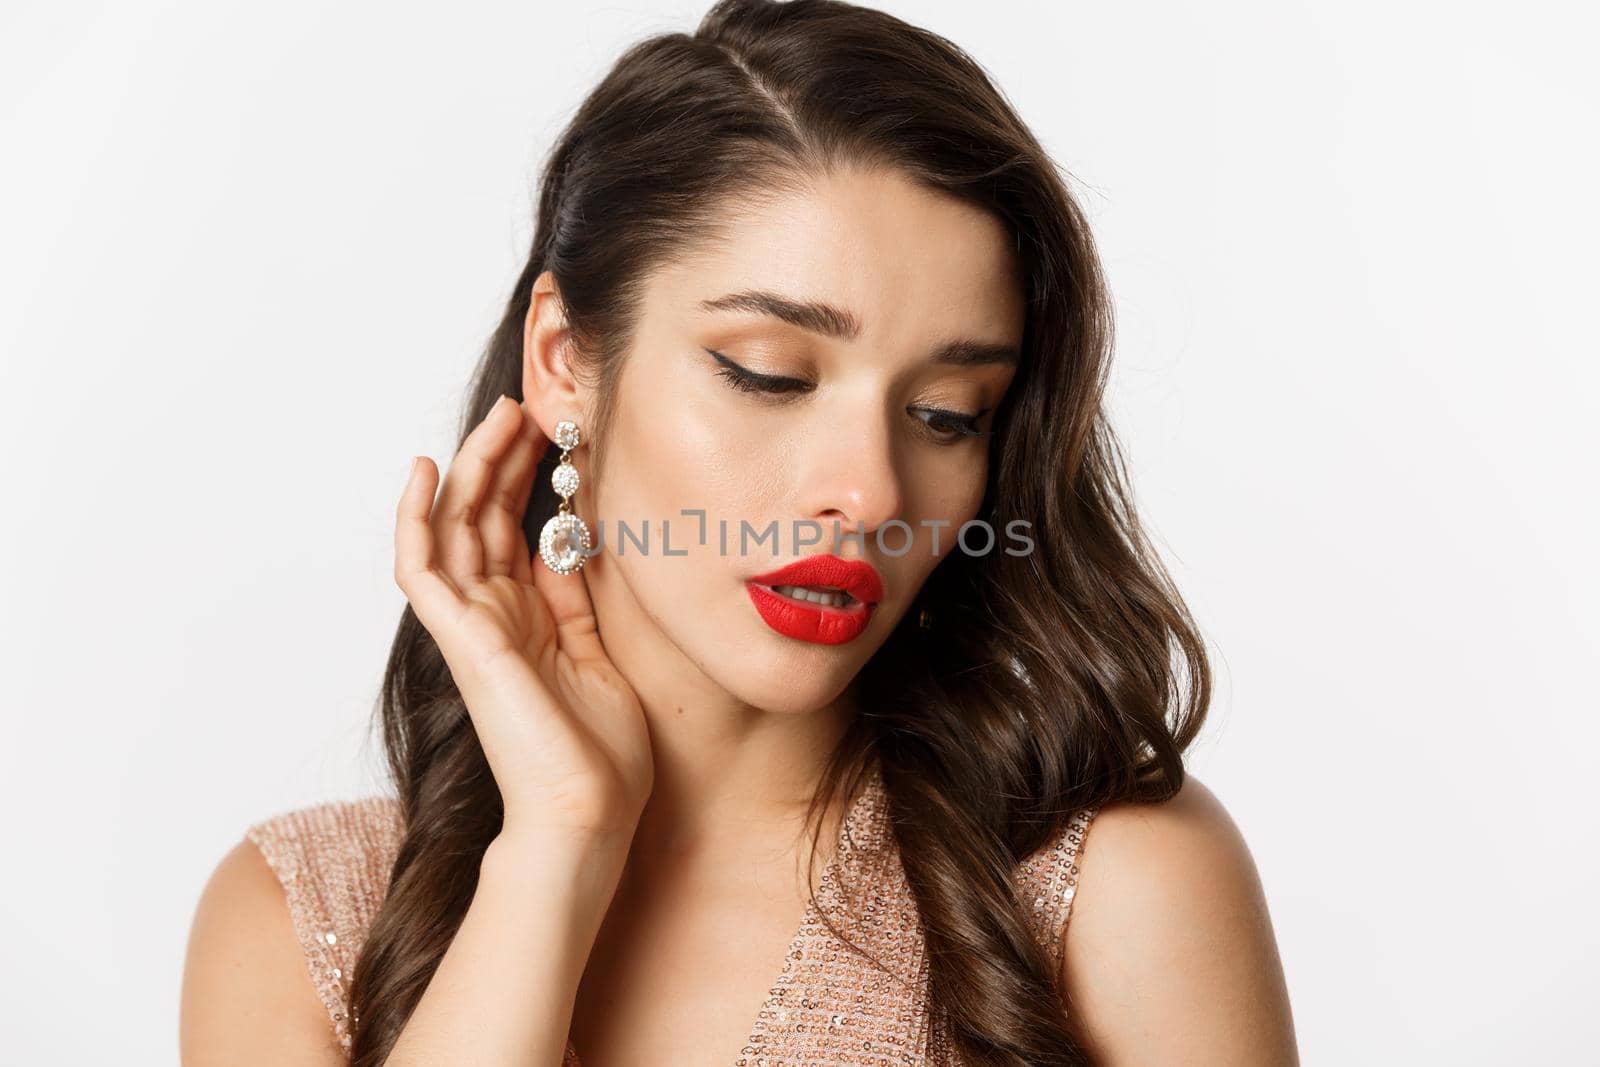 Concept of New Year celebration and winter holidays. Headshot of elegant brunette woman with red lips, showing earrings and looking sensual, white background.